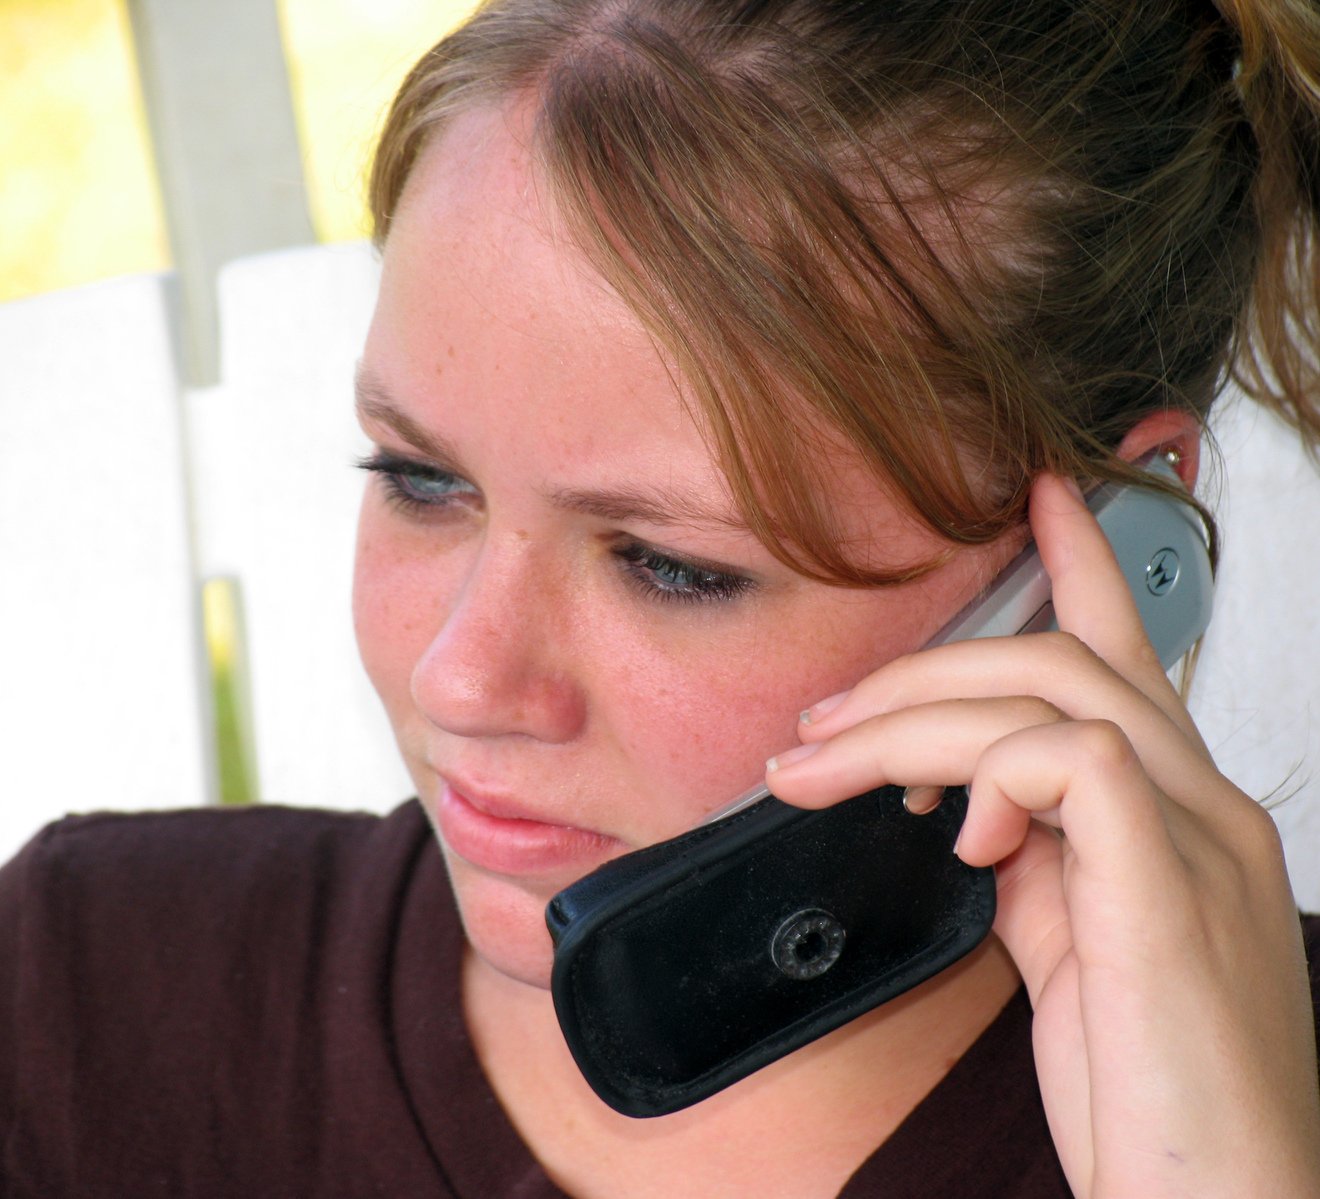 a woman with a cell phone to her ear